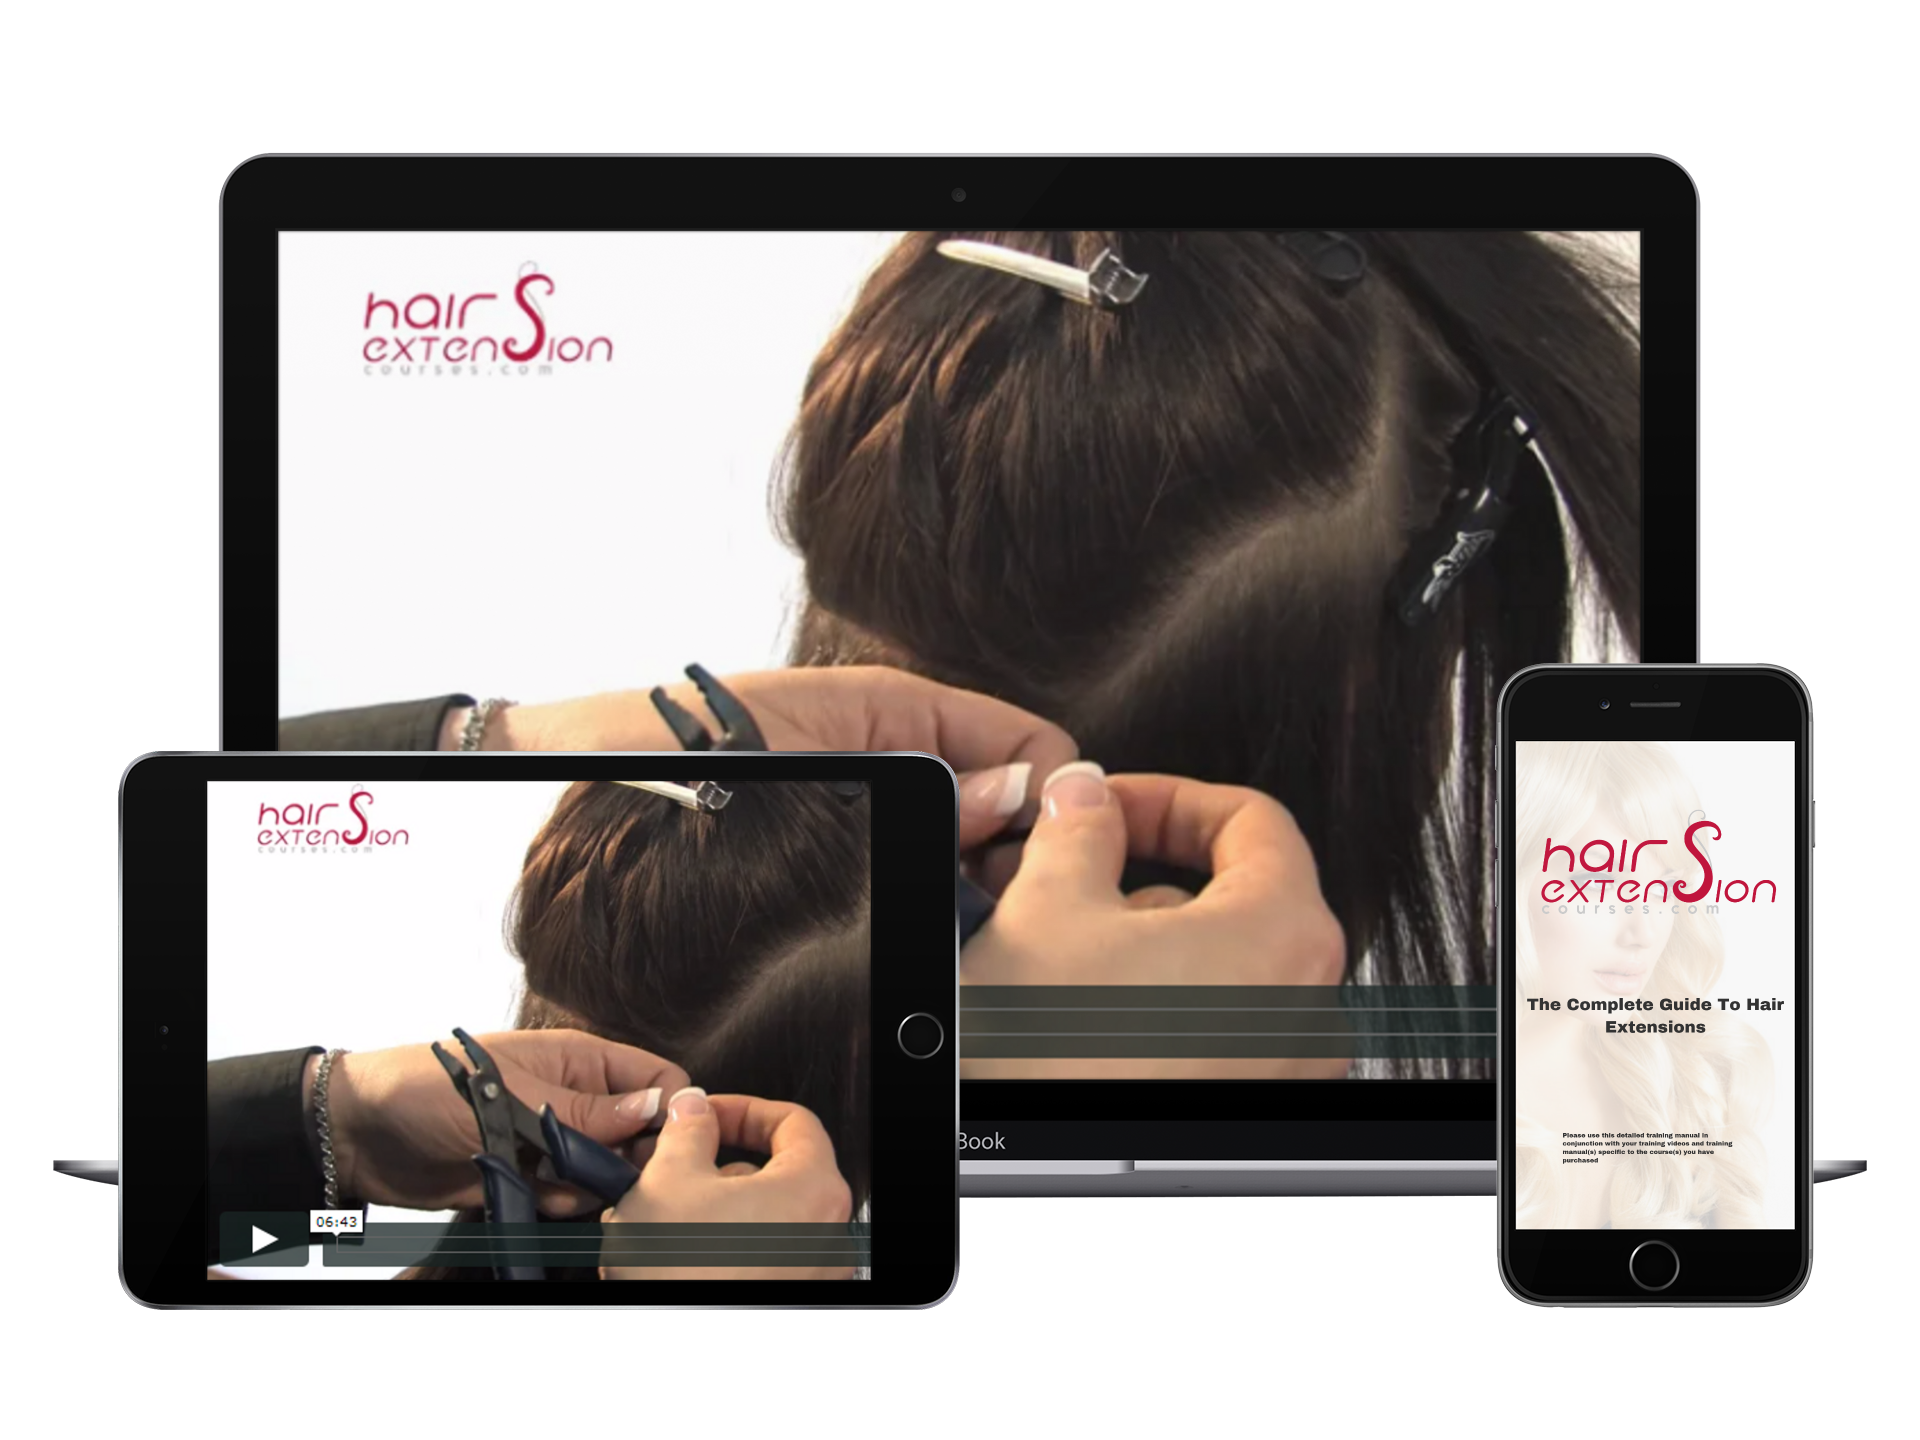 Nano Ring Hair Extensions Course | With Training Head | Hair | Tools